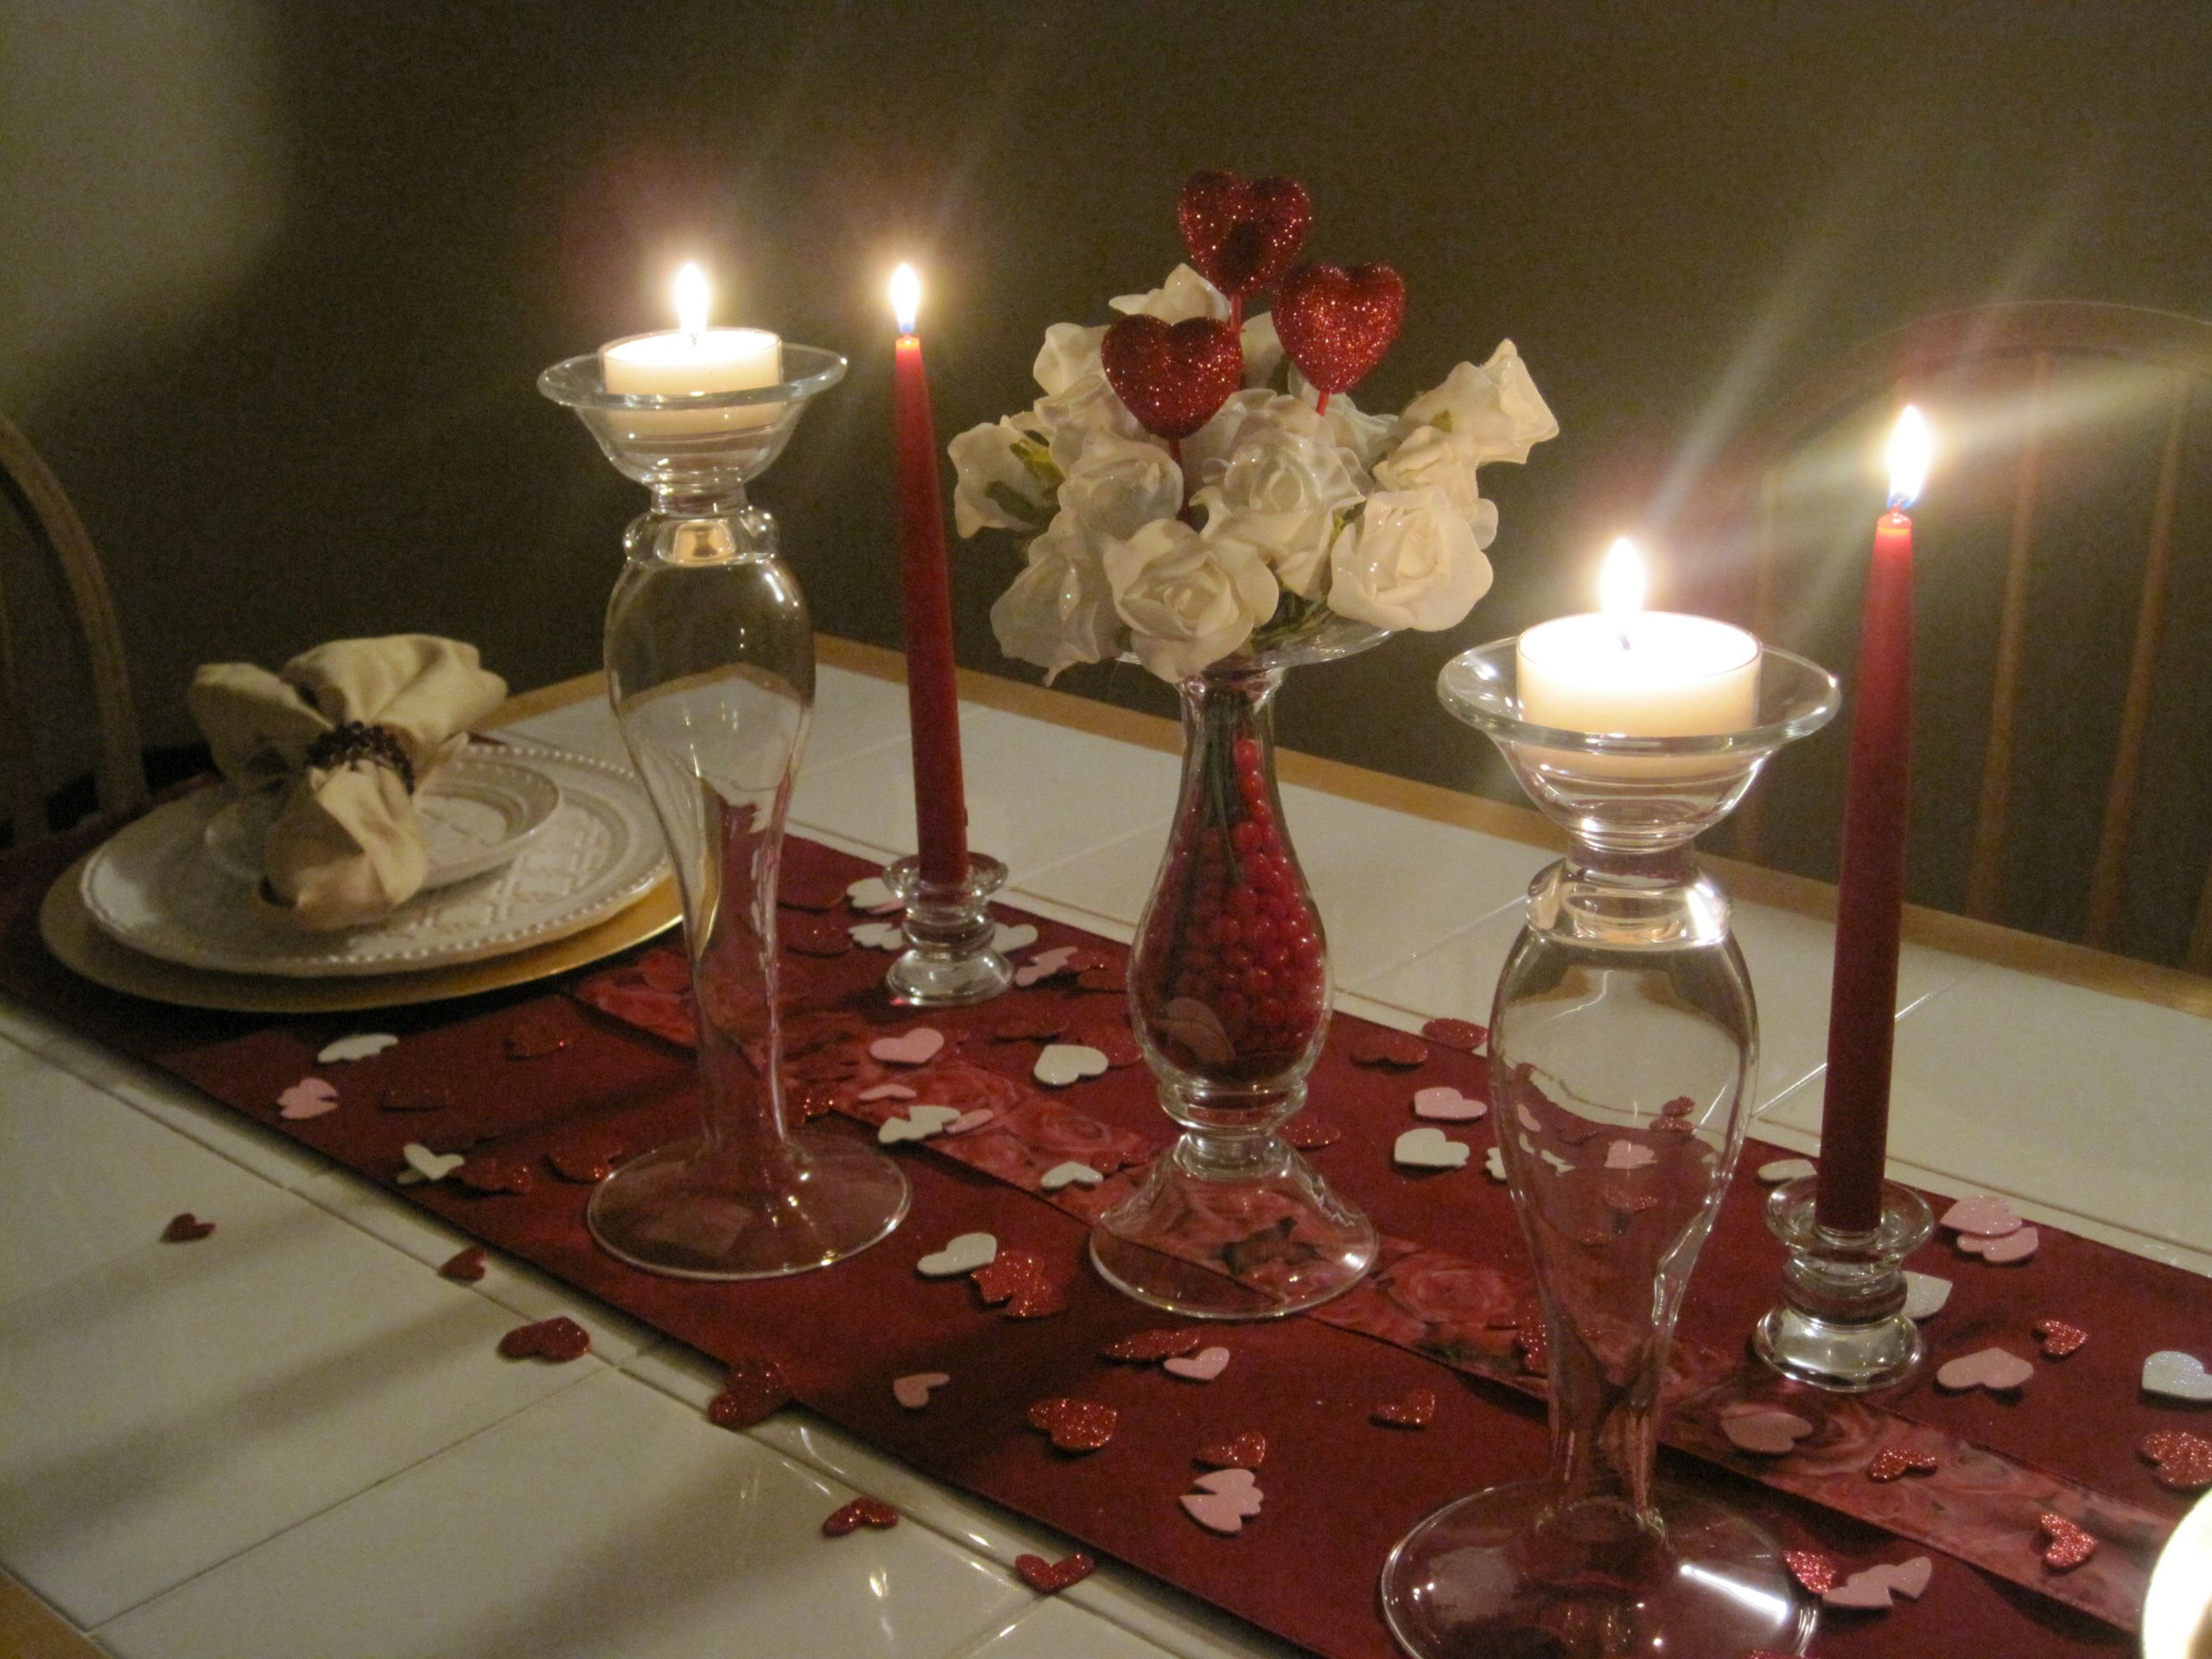 Romantic Valentines Dinners At Home
 Keeppy 100 Ideas for Your Romantic Valentine Dinner